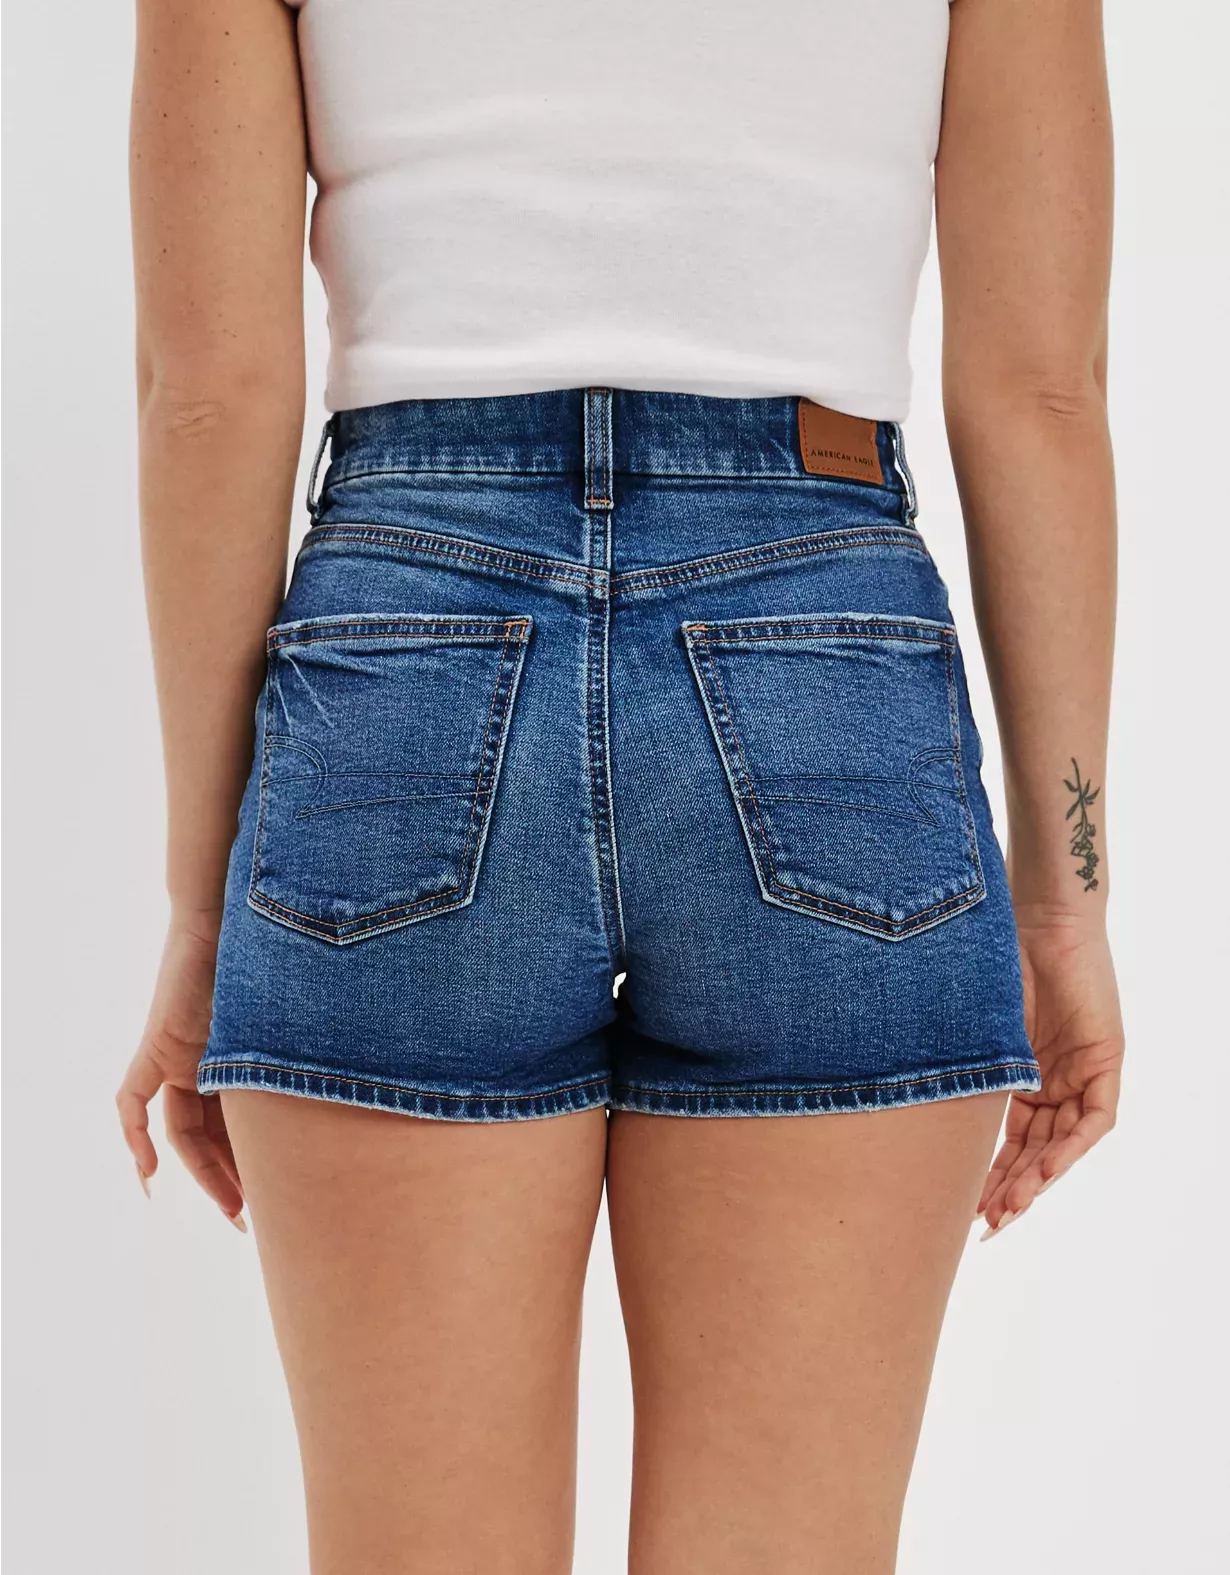 Shorts for Women: High-Waisted, Mom Shorts & More, American Eagle  Outfitters